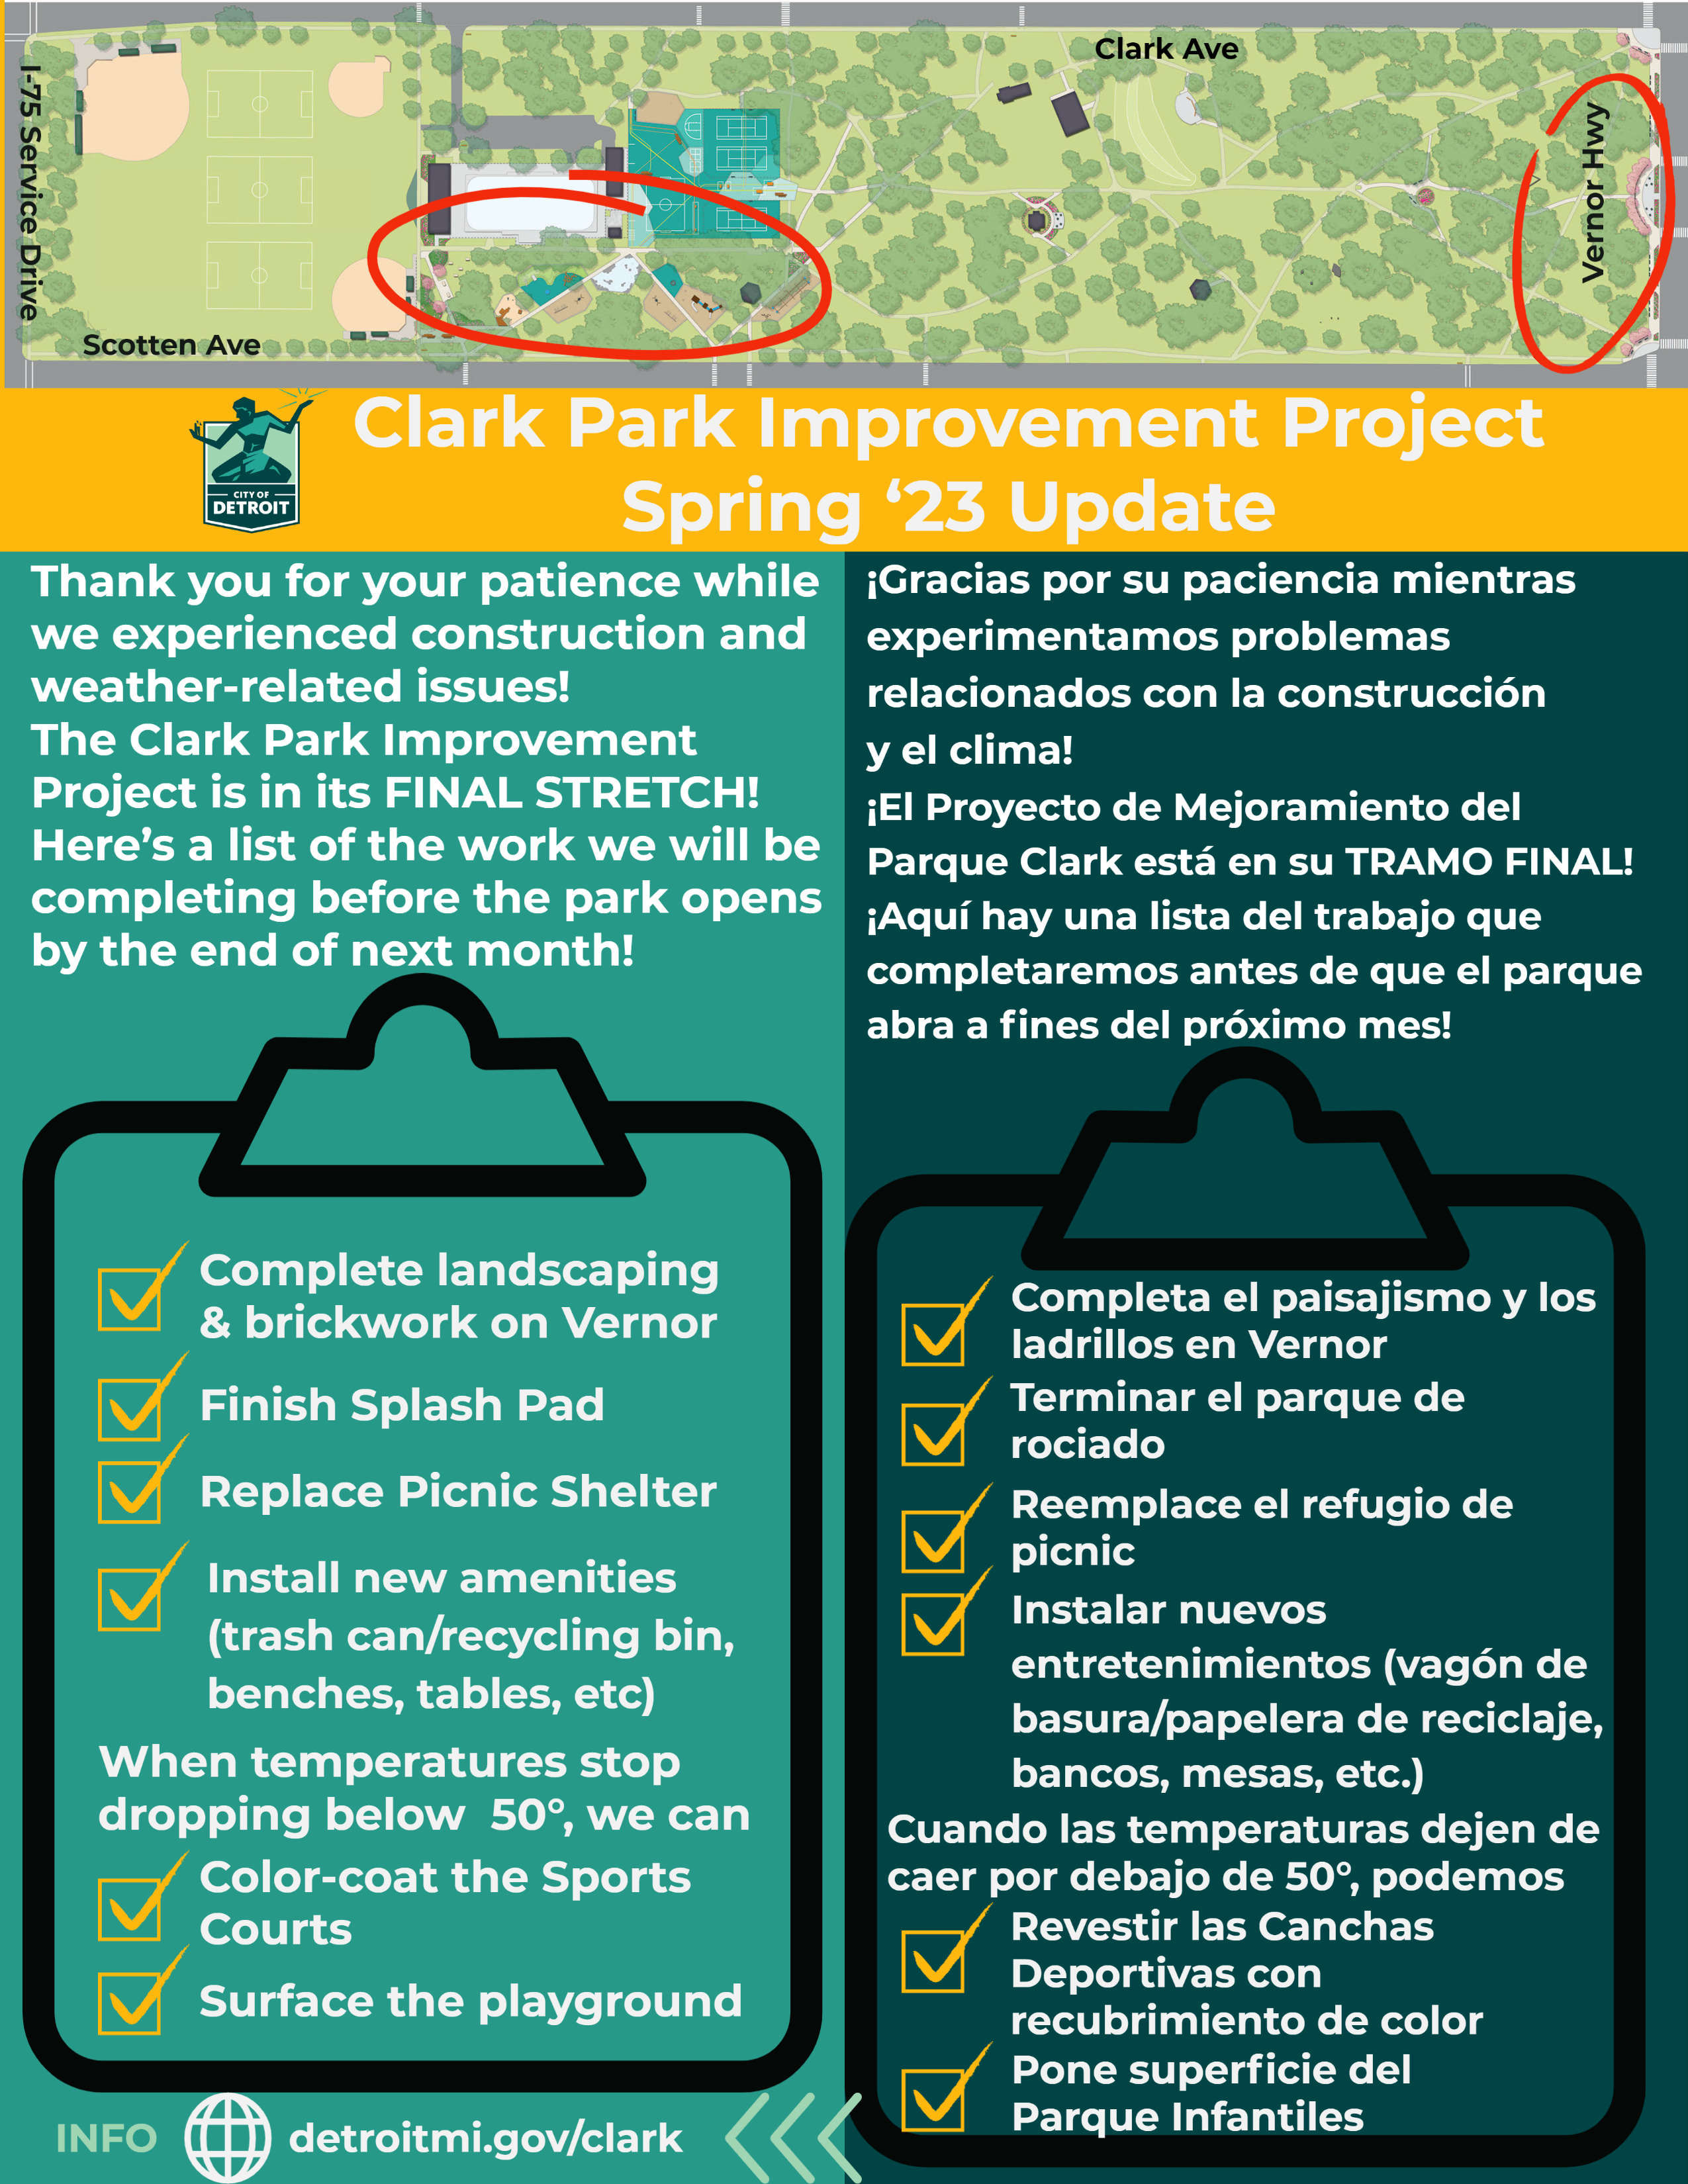 List of things that will be completed at Clark Park before it opens next month